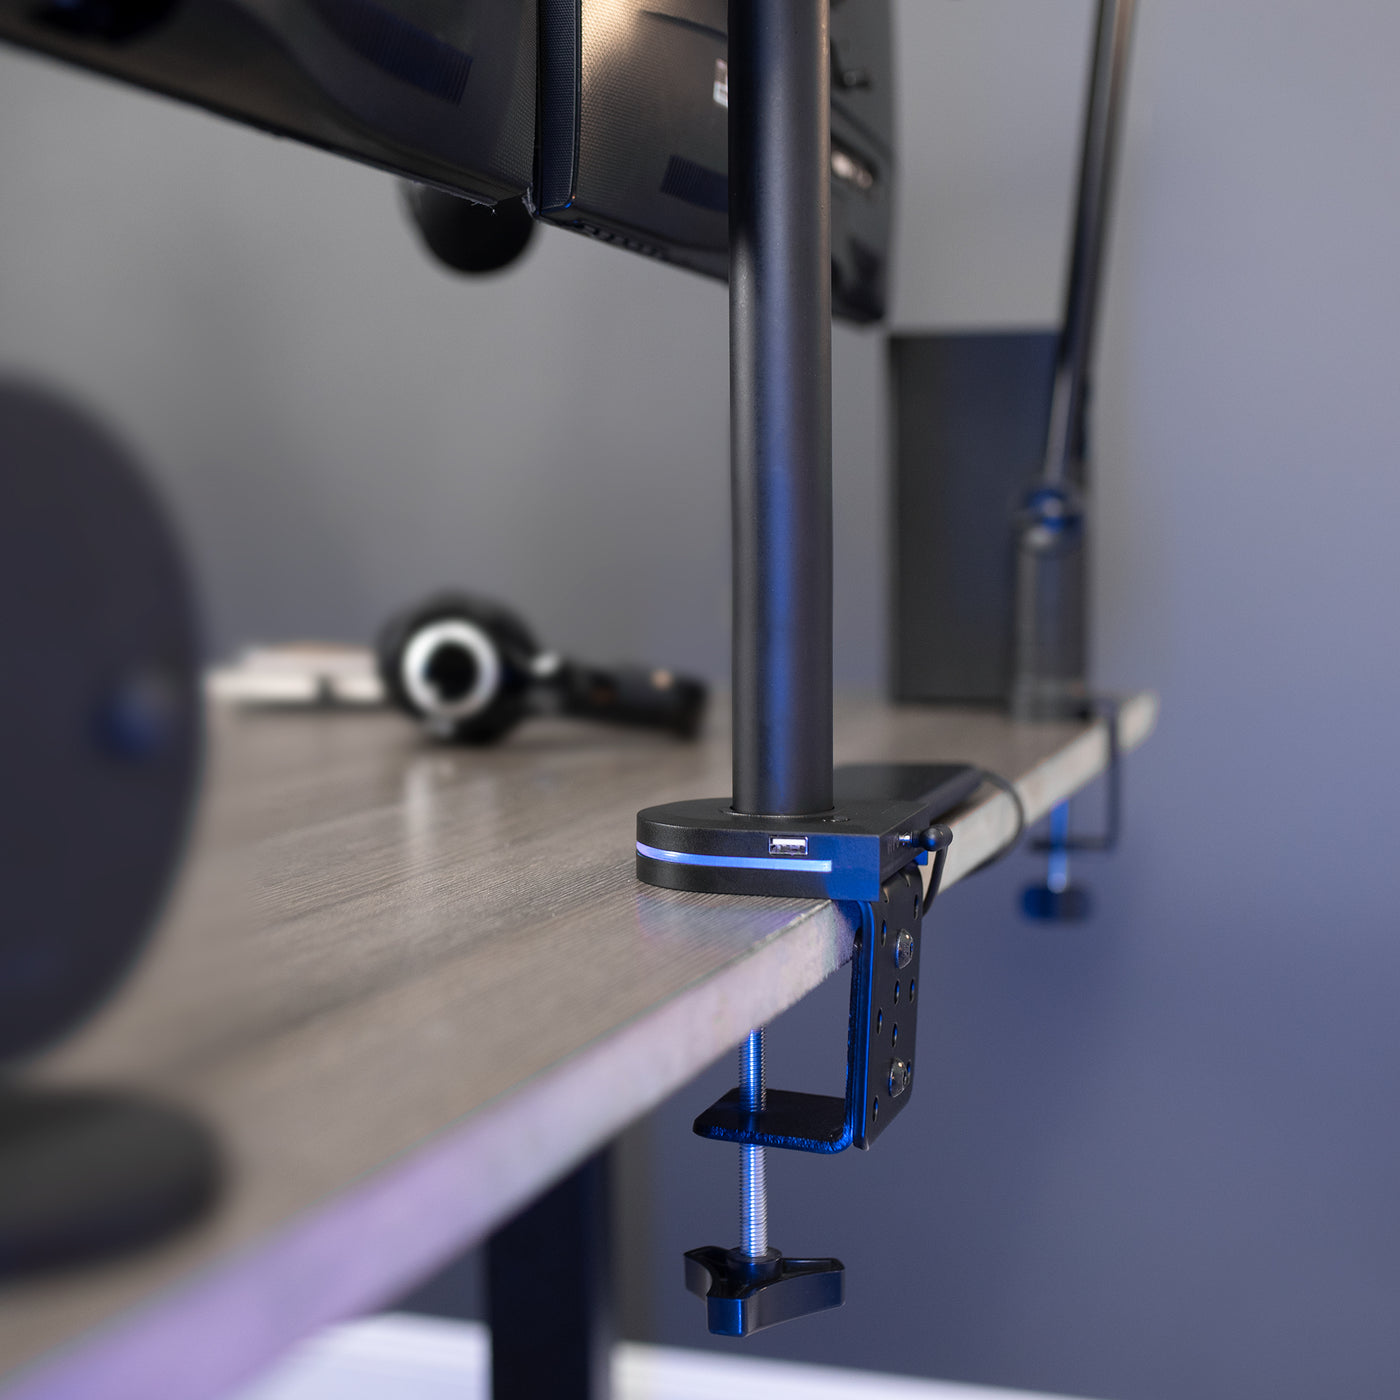 Low profile color-changing monitor mount base.